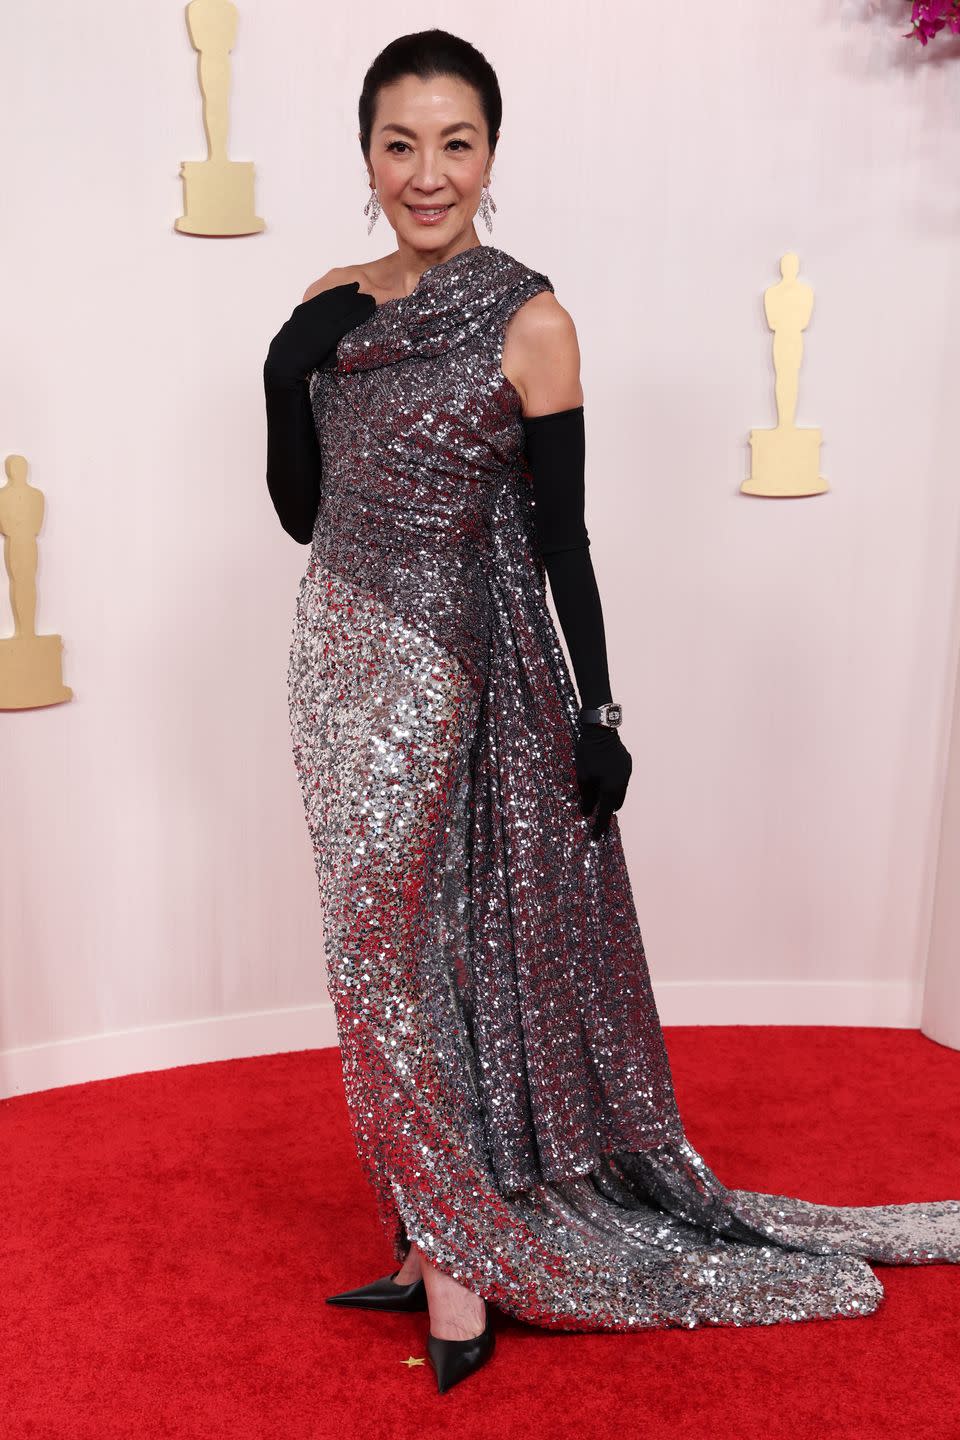 Michelle Yeoh Sends Hearts Racing in a Metallic Sequined Gown at the